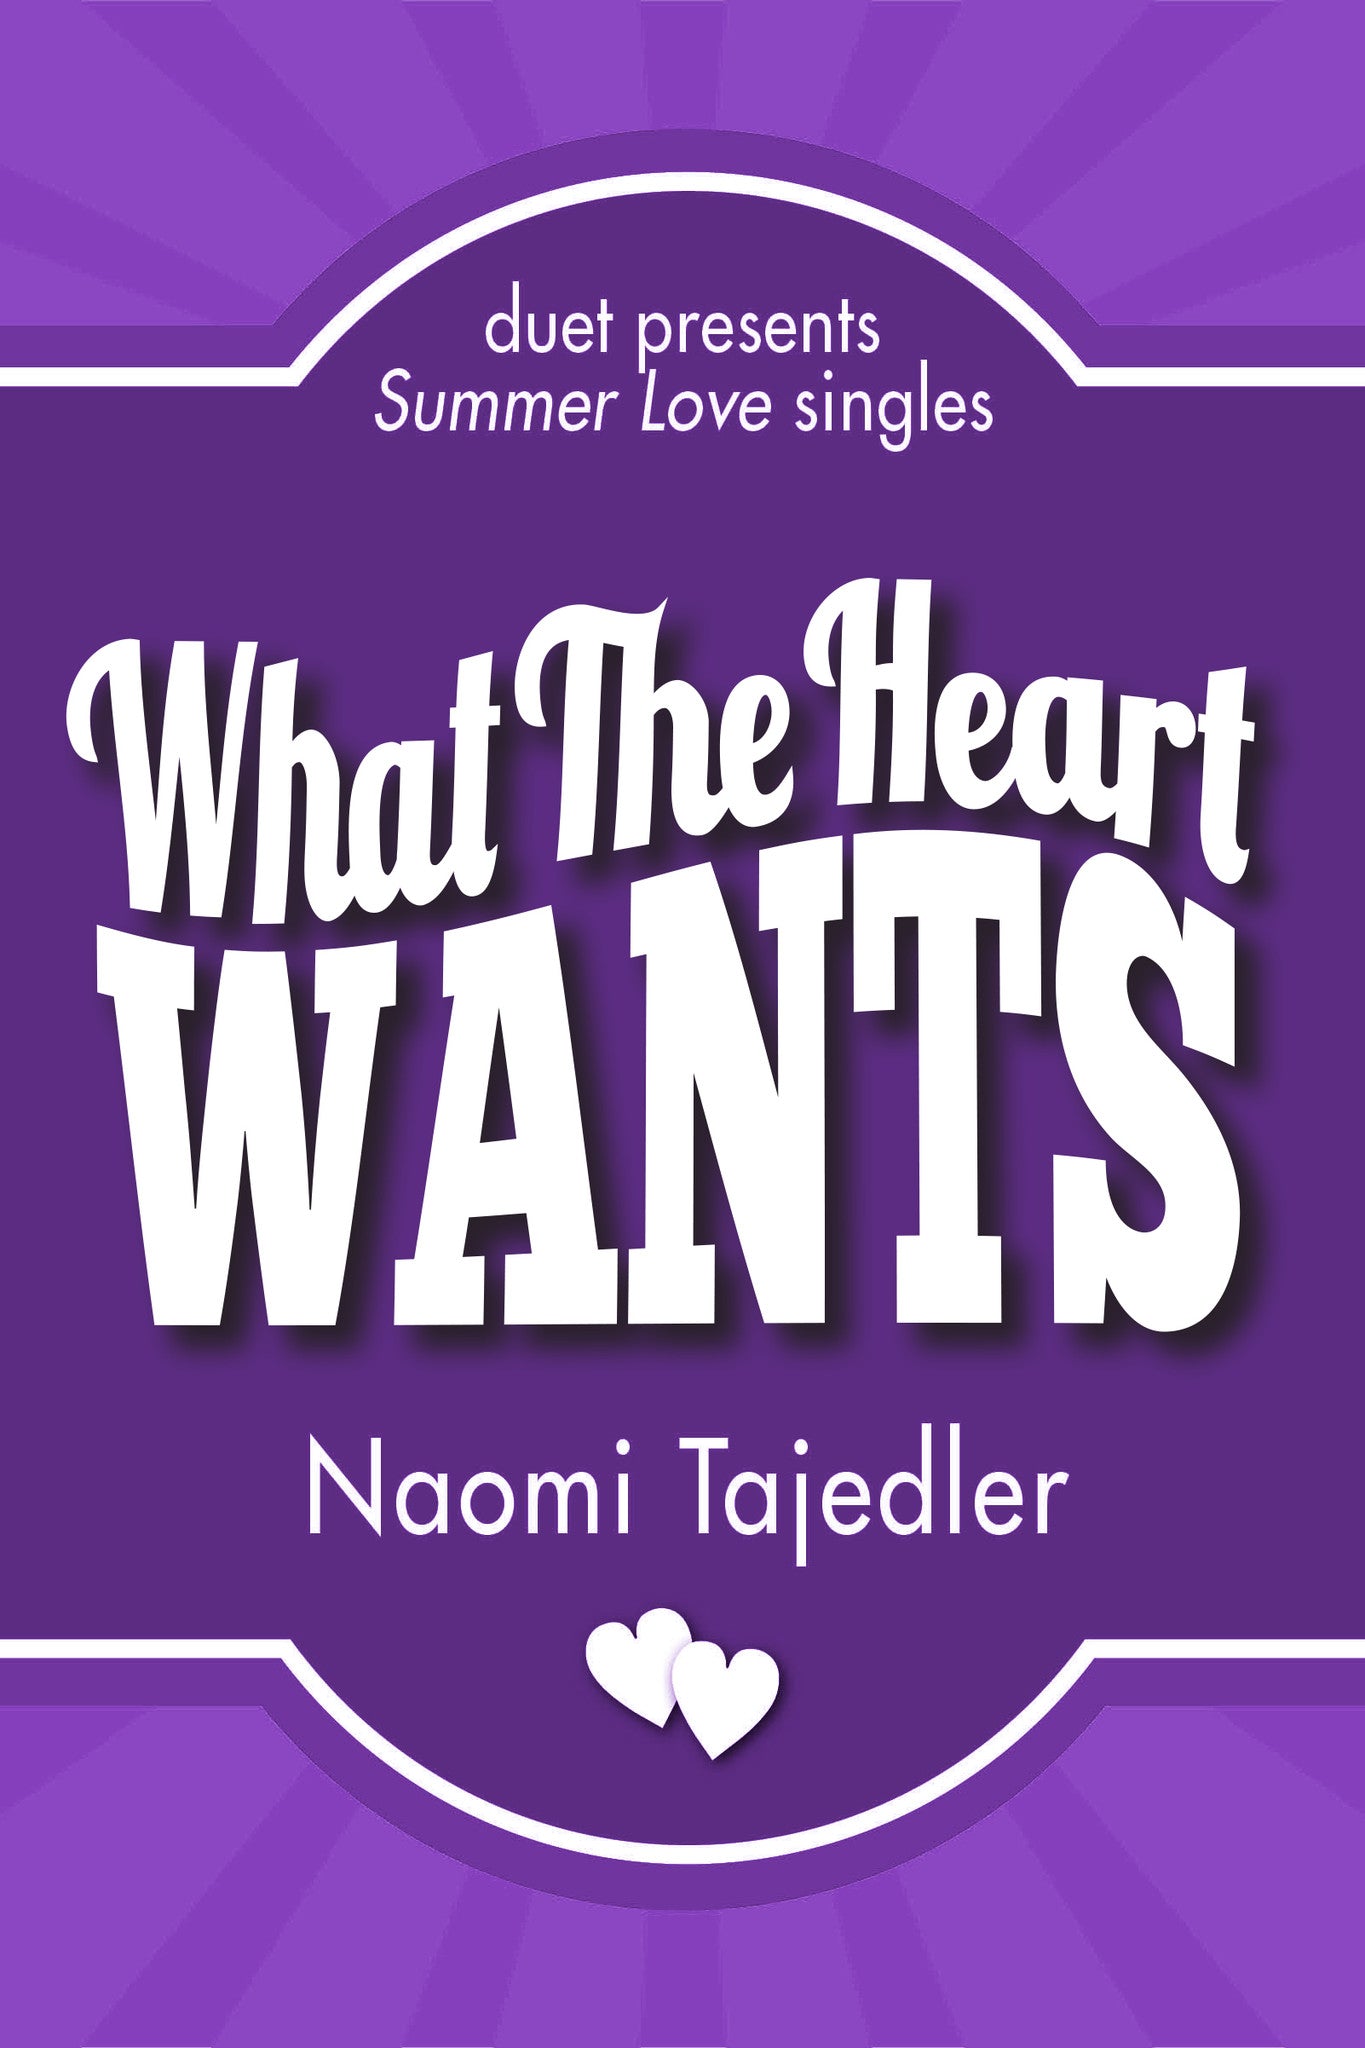 What the Heart Wants by Naomi Tajedler